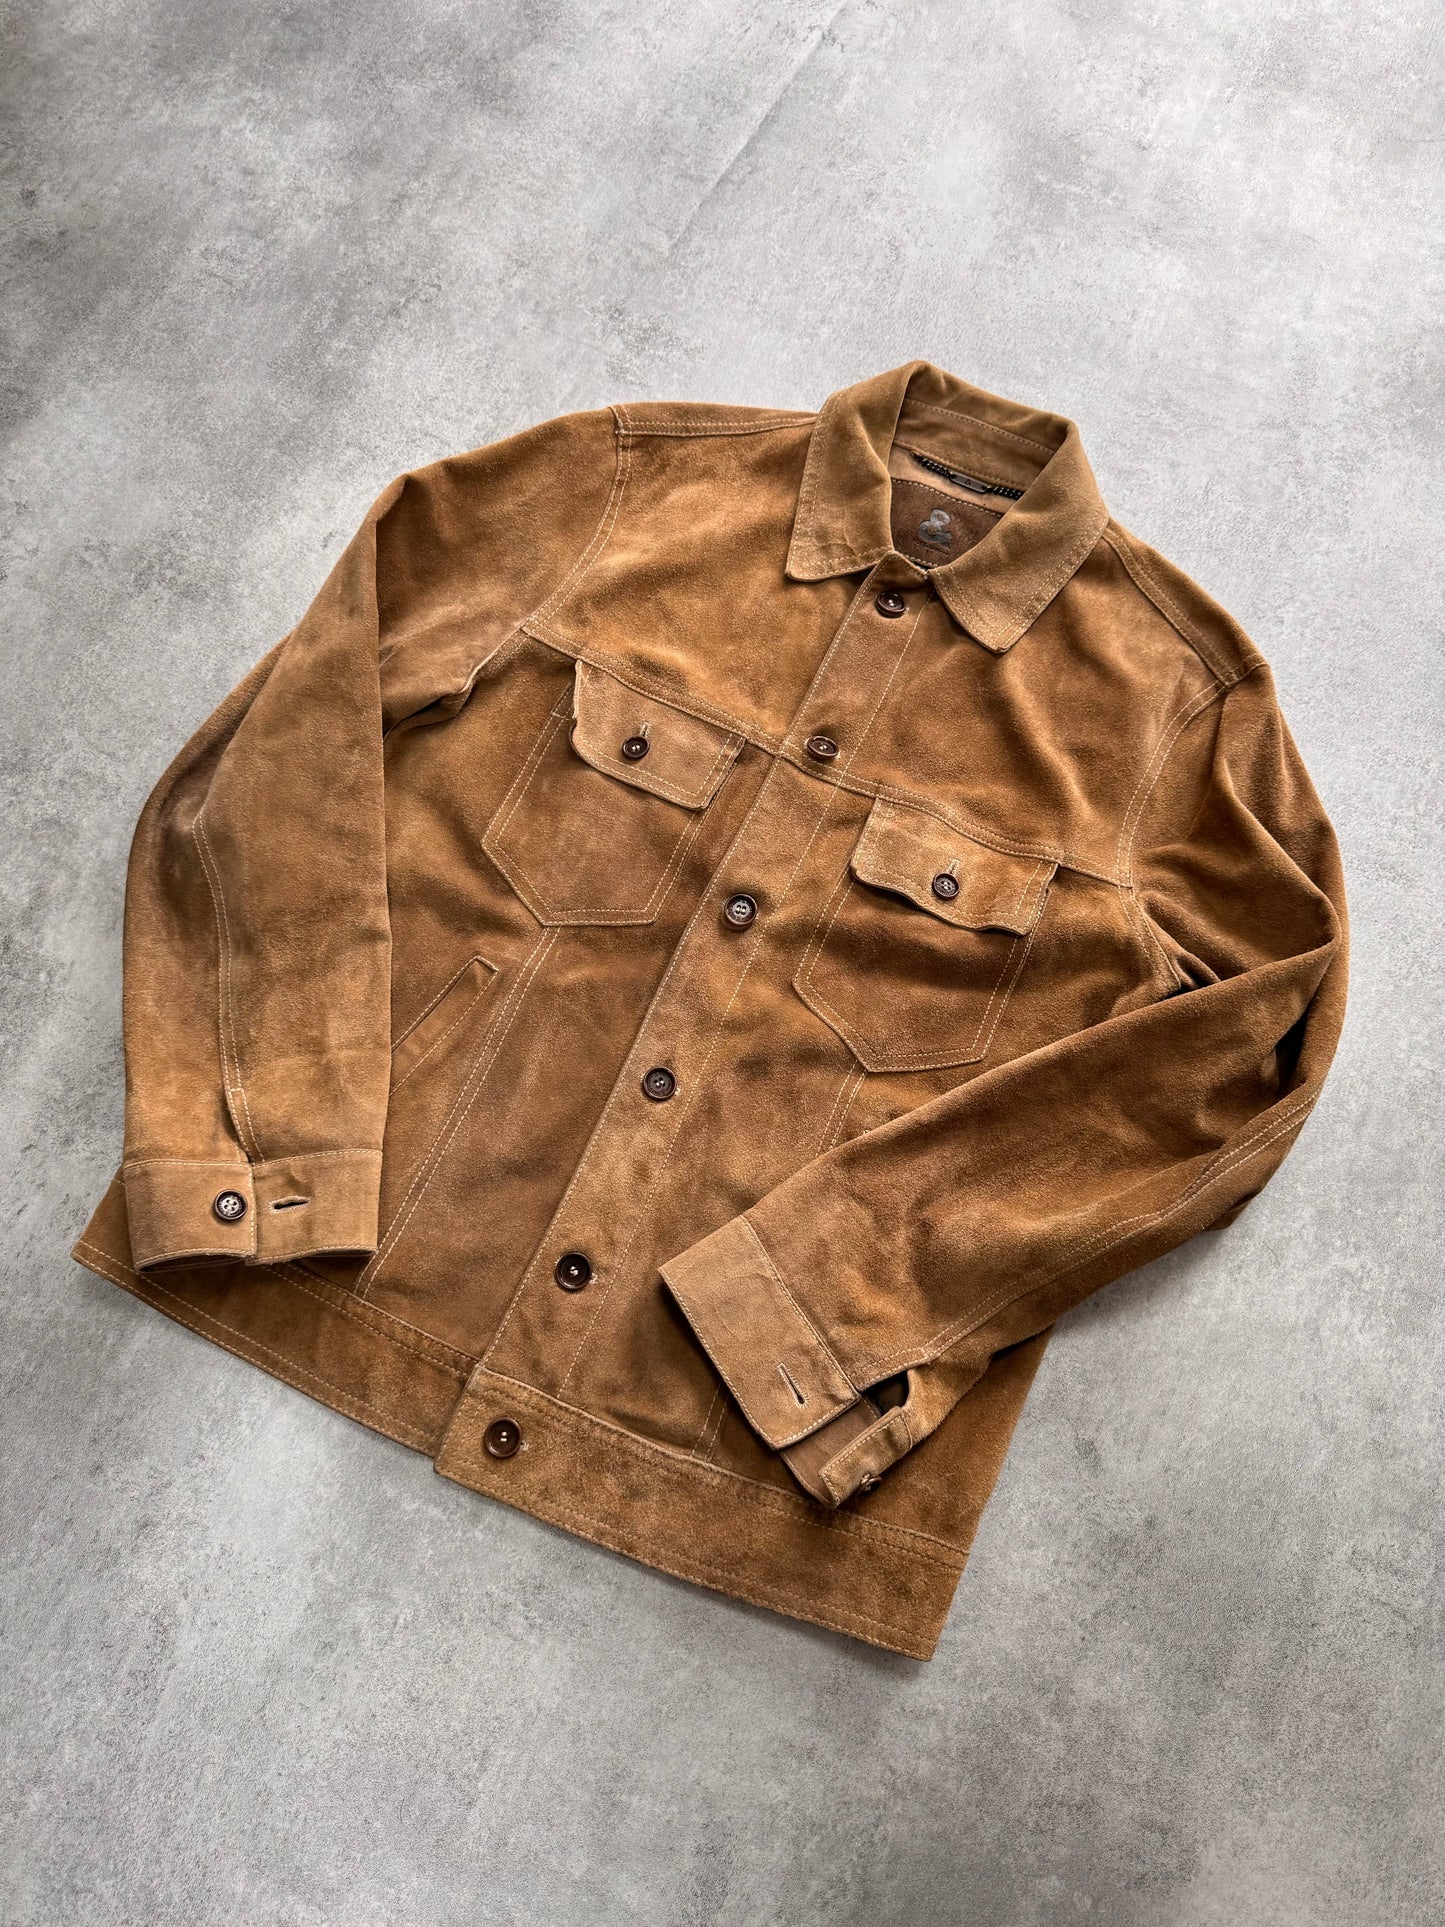 Dolce & Gabbana Suede Leather Jacket (M)